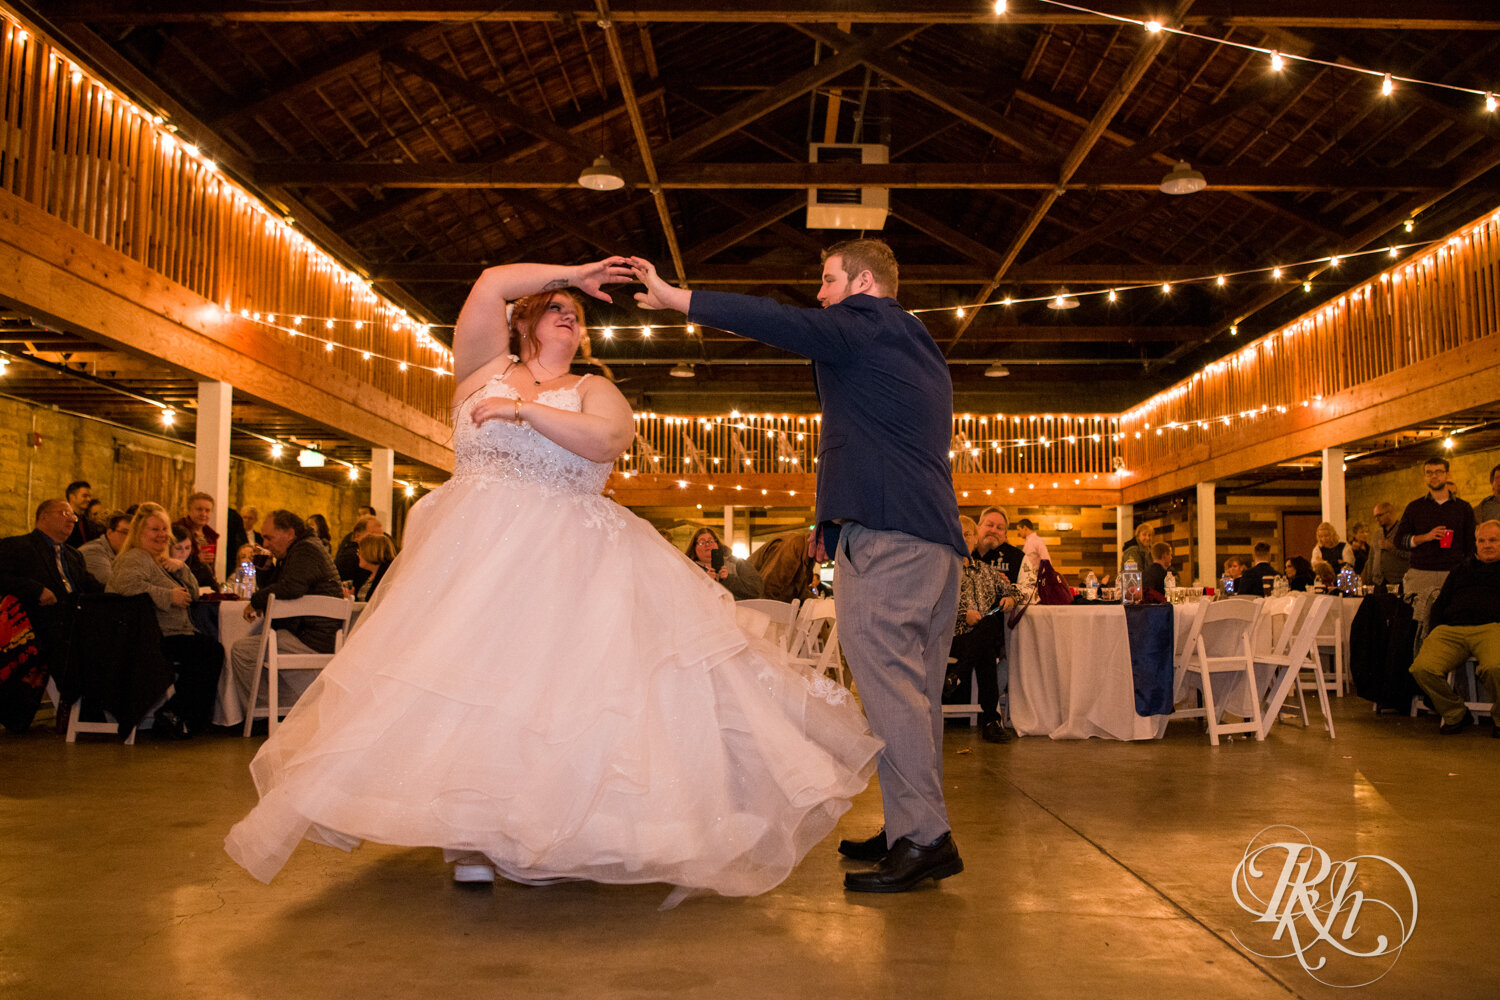 Plus size bride and groom dance at wedding reception at Olmsted County Fairgrounds in Rochester, Minnesota.